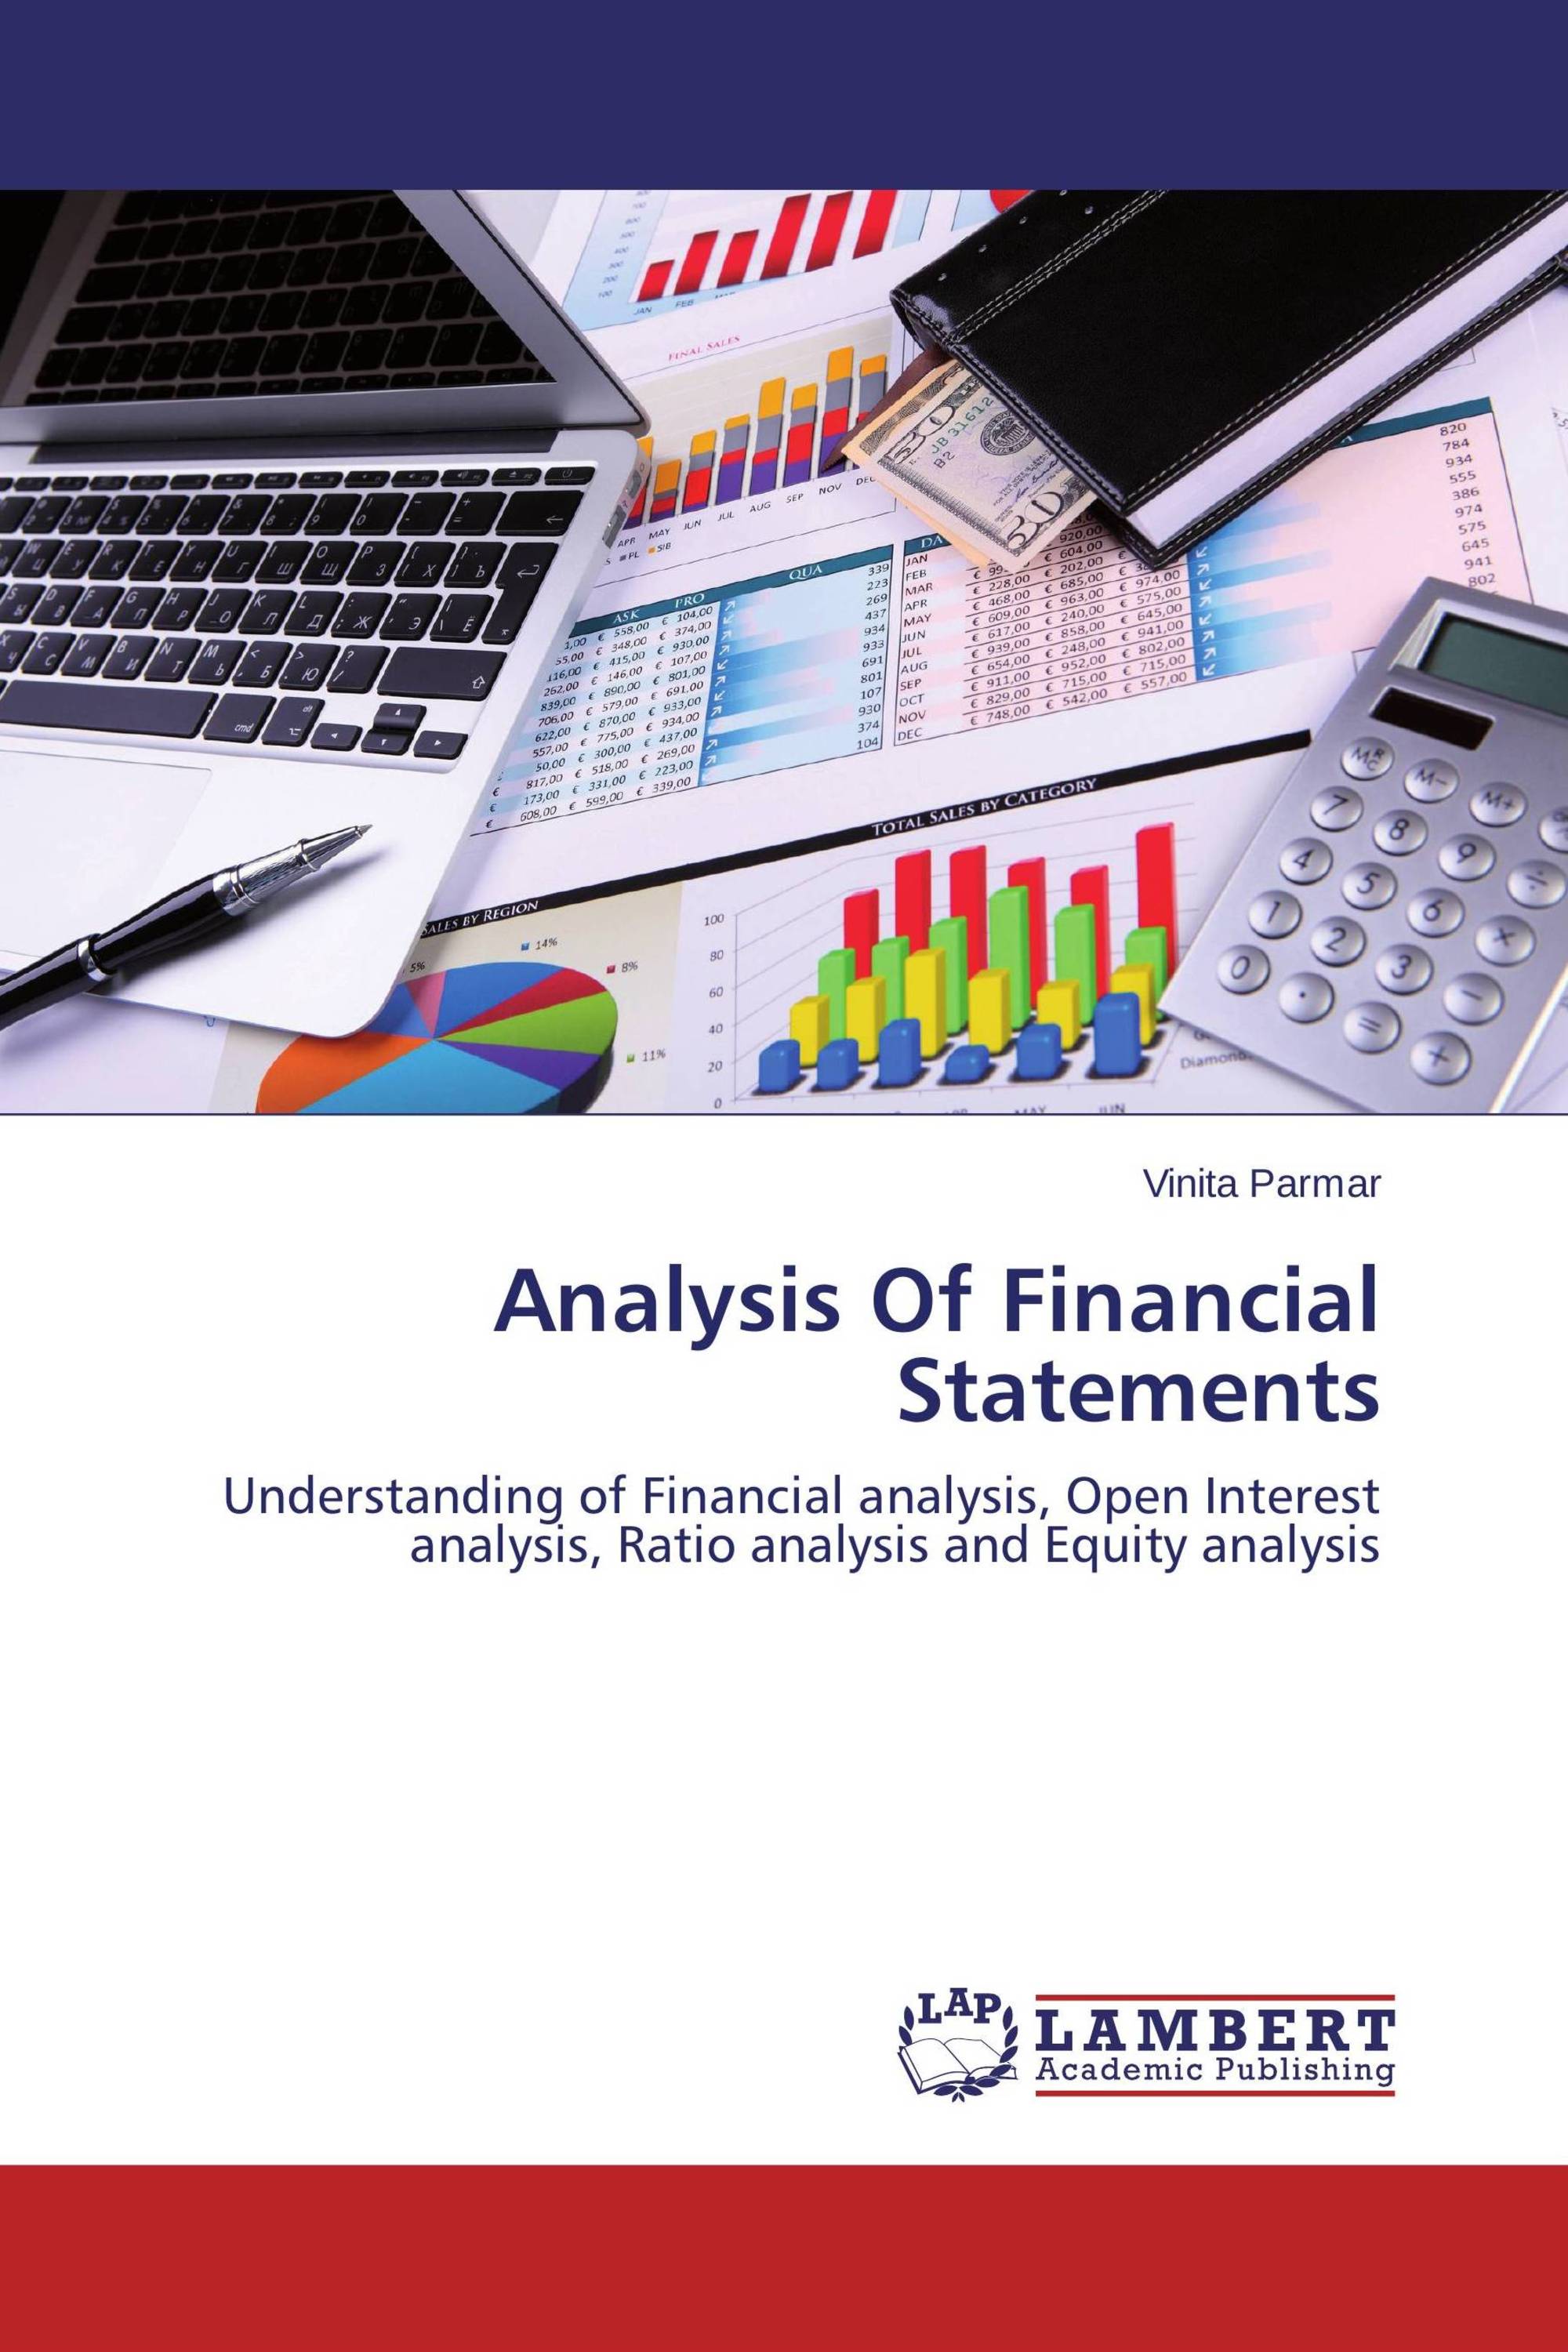 thesis on financial statement analysis